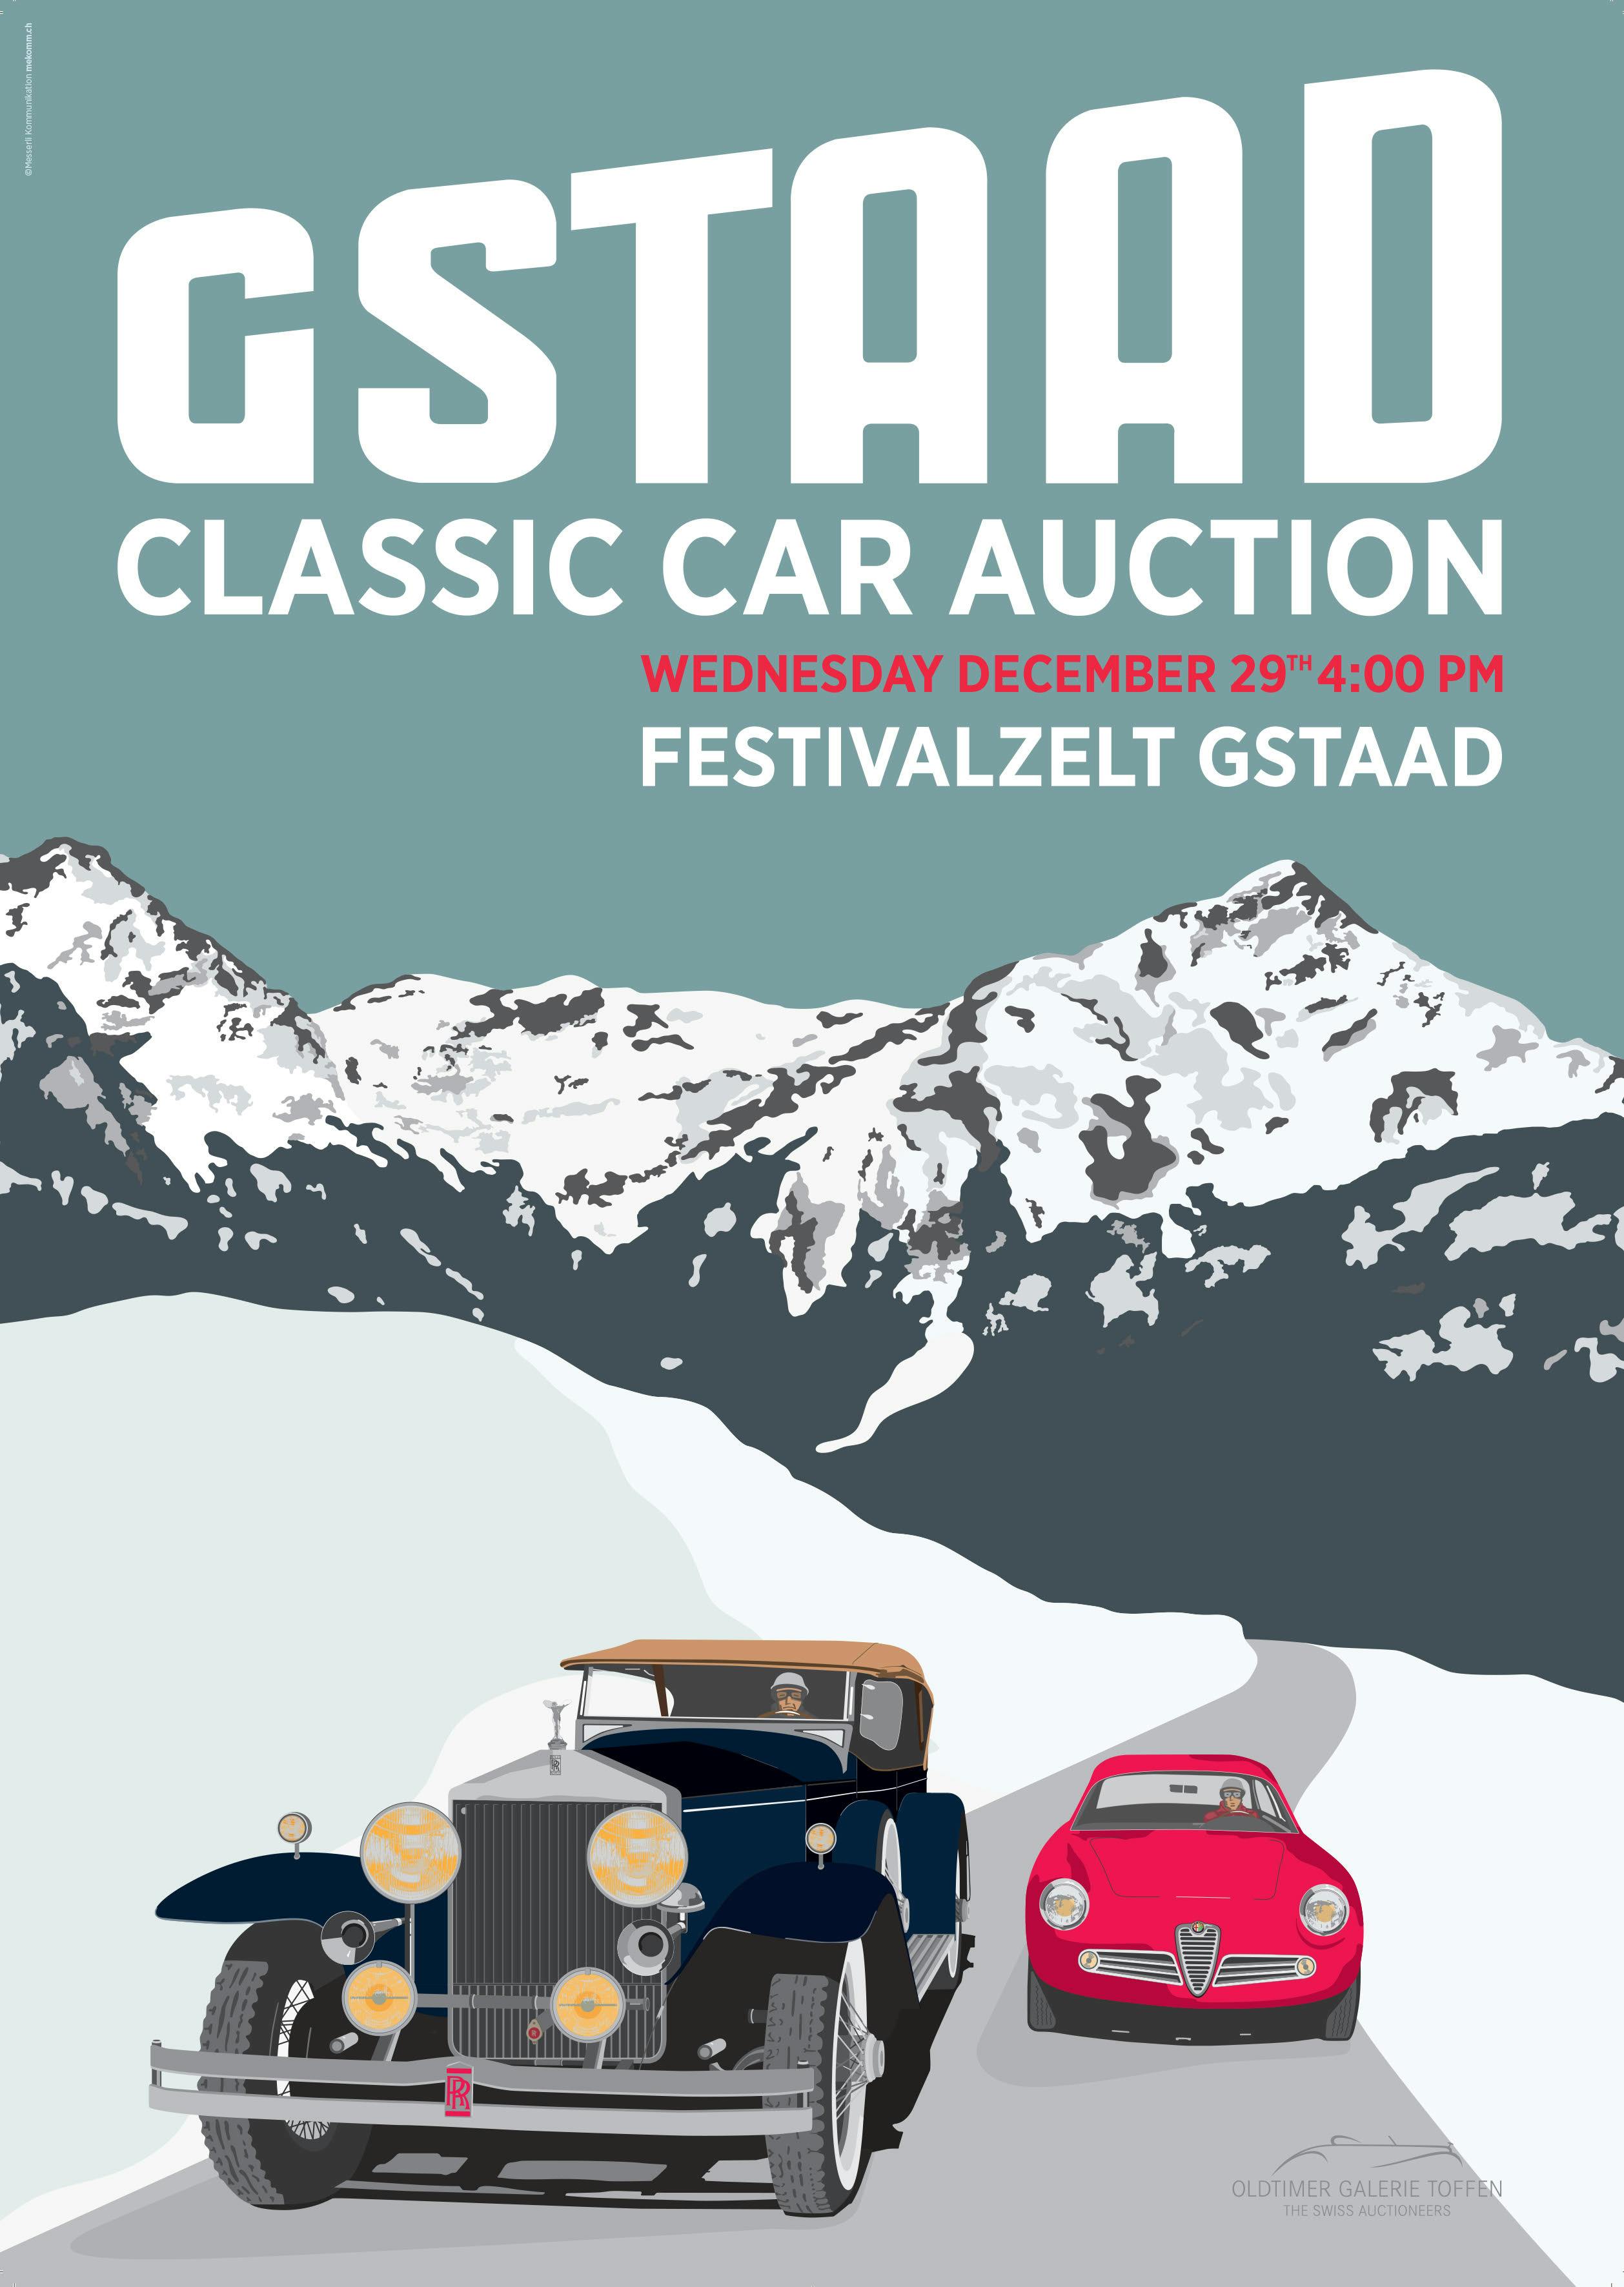 GSTAAD CLASSIC CAR AUCTION - December 29th 2018 by Oldtimer Galerie  International GmbH - Issuu